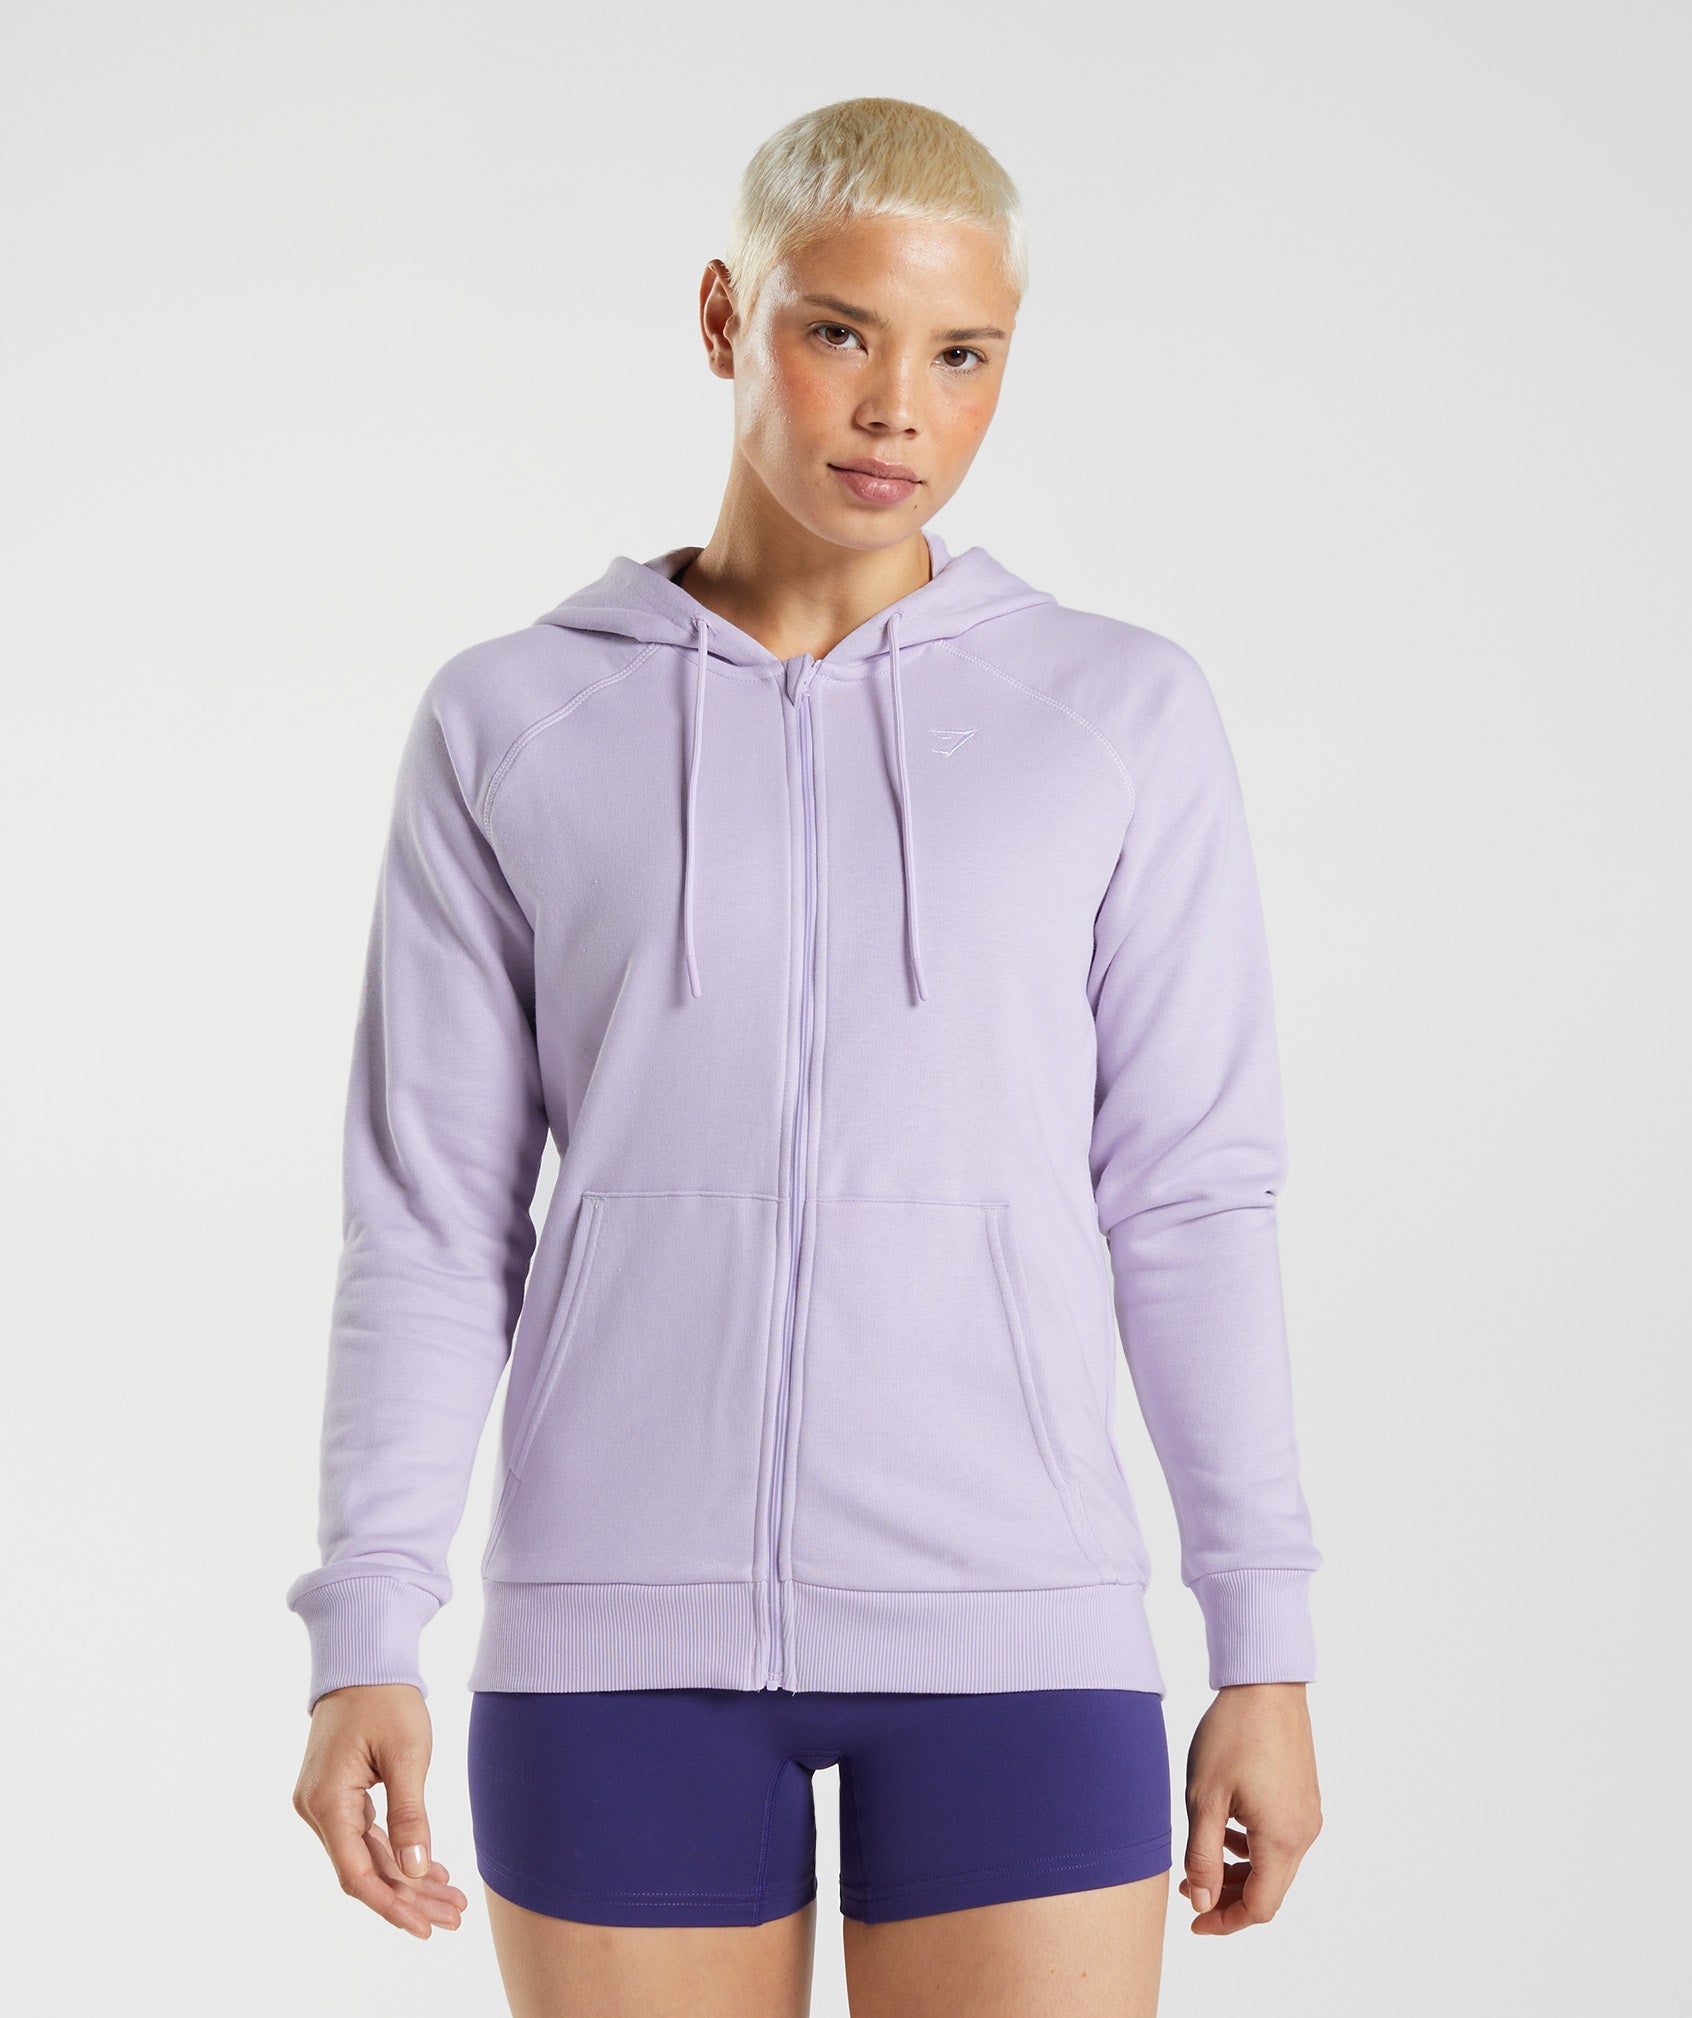 Gymshark Sleeveless Hoodie - Soft Lilac  Athletic tank tops, Fashion, Fit  women